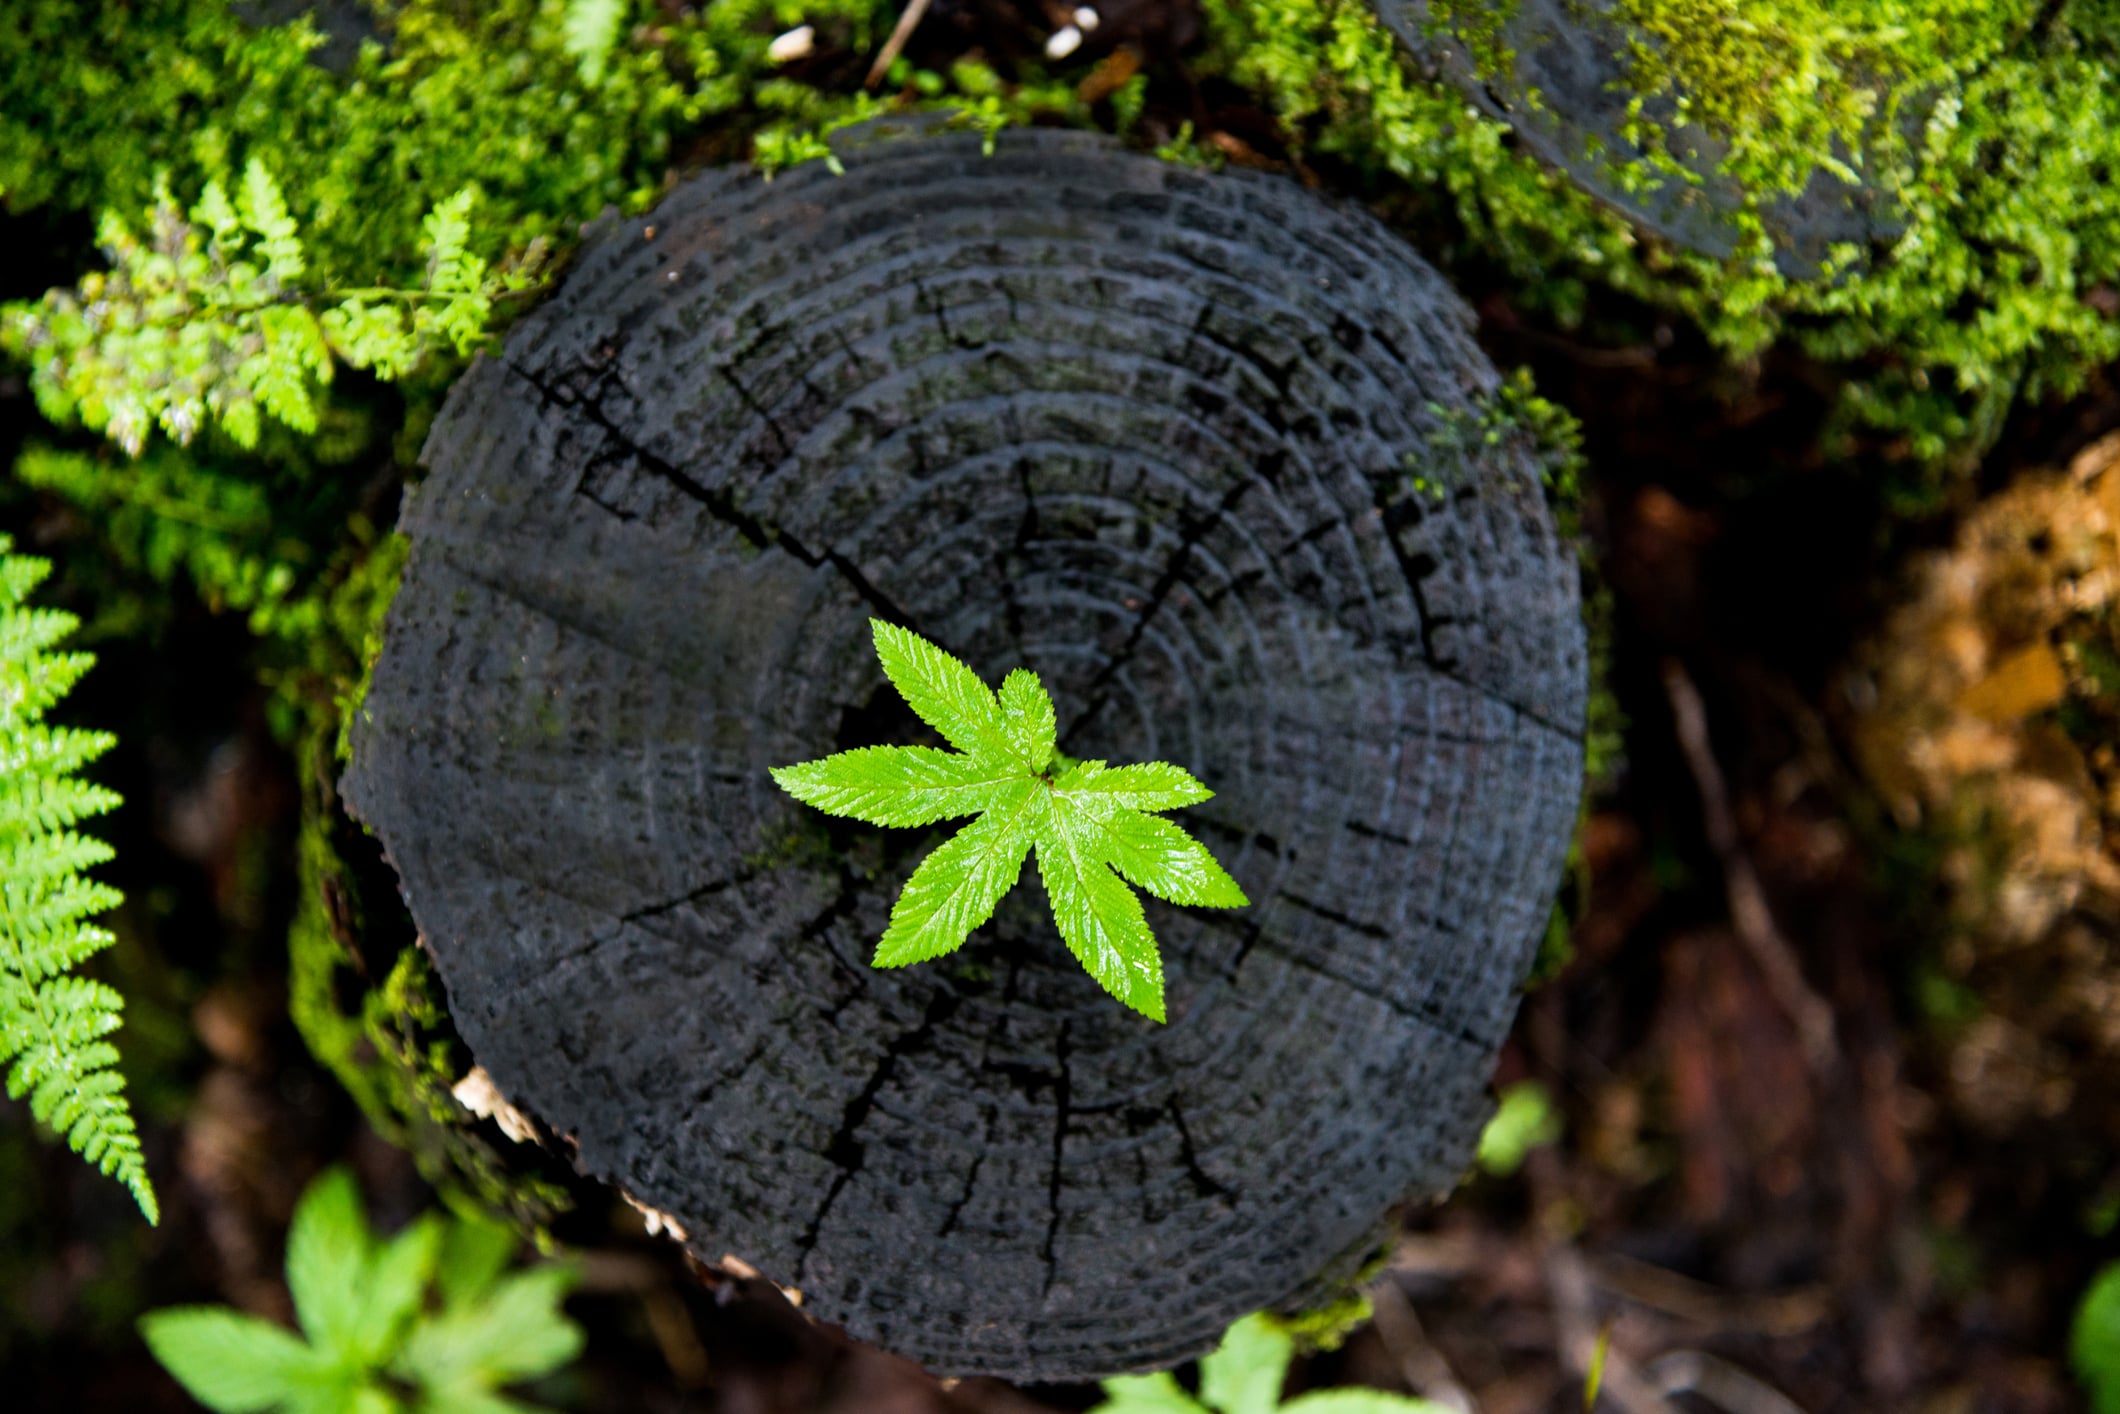 A seedling growing in the stump of a tree.